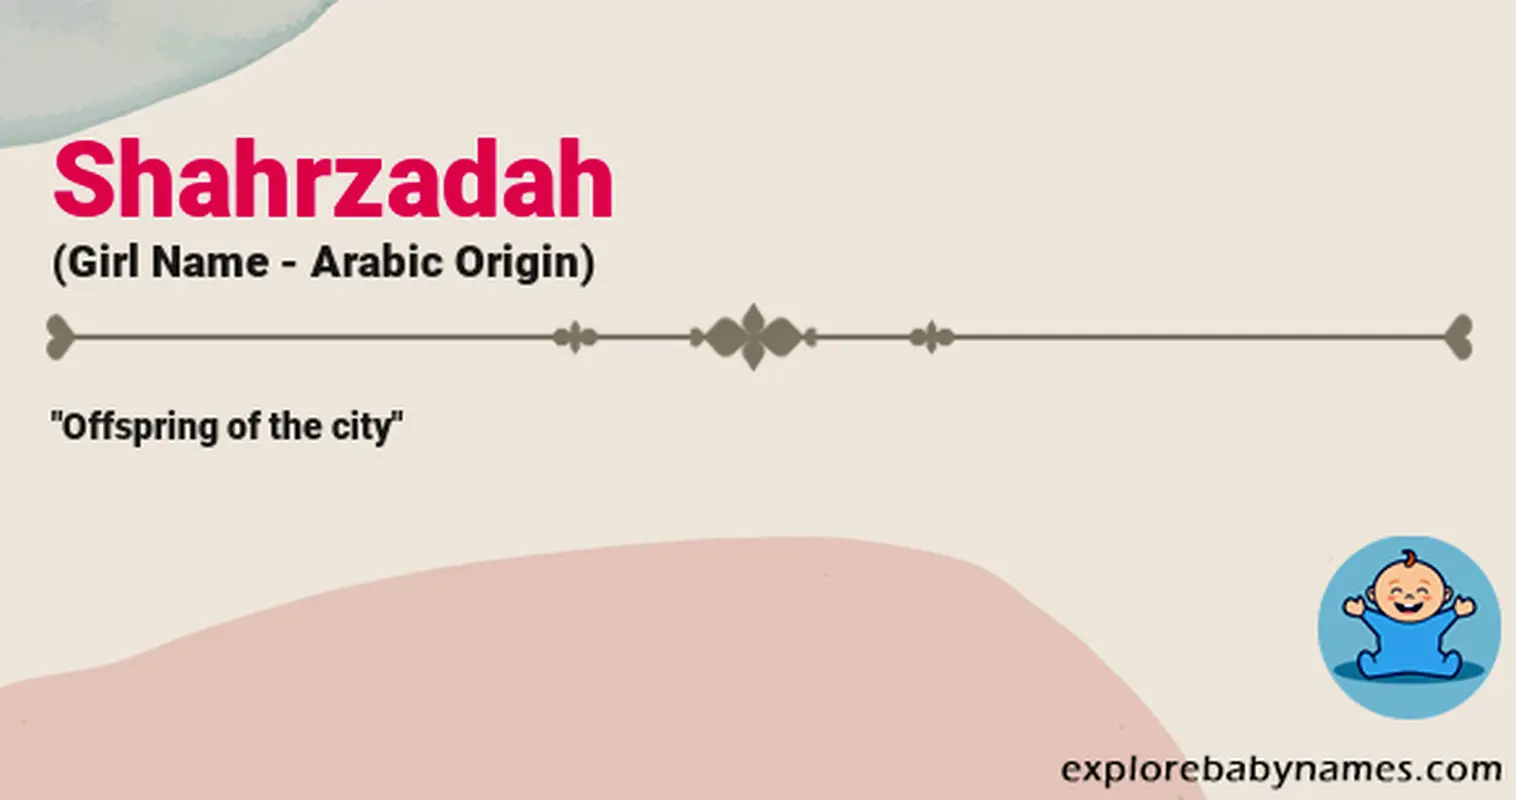 Meaning of Shahrzadah